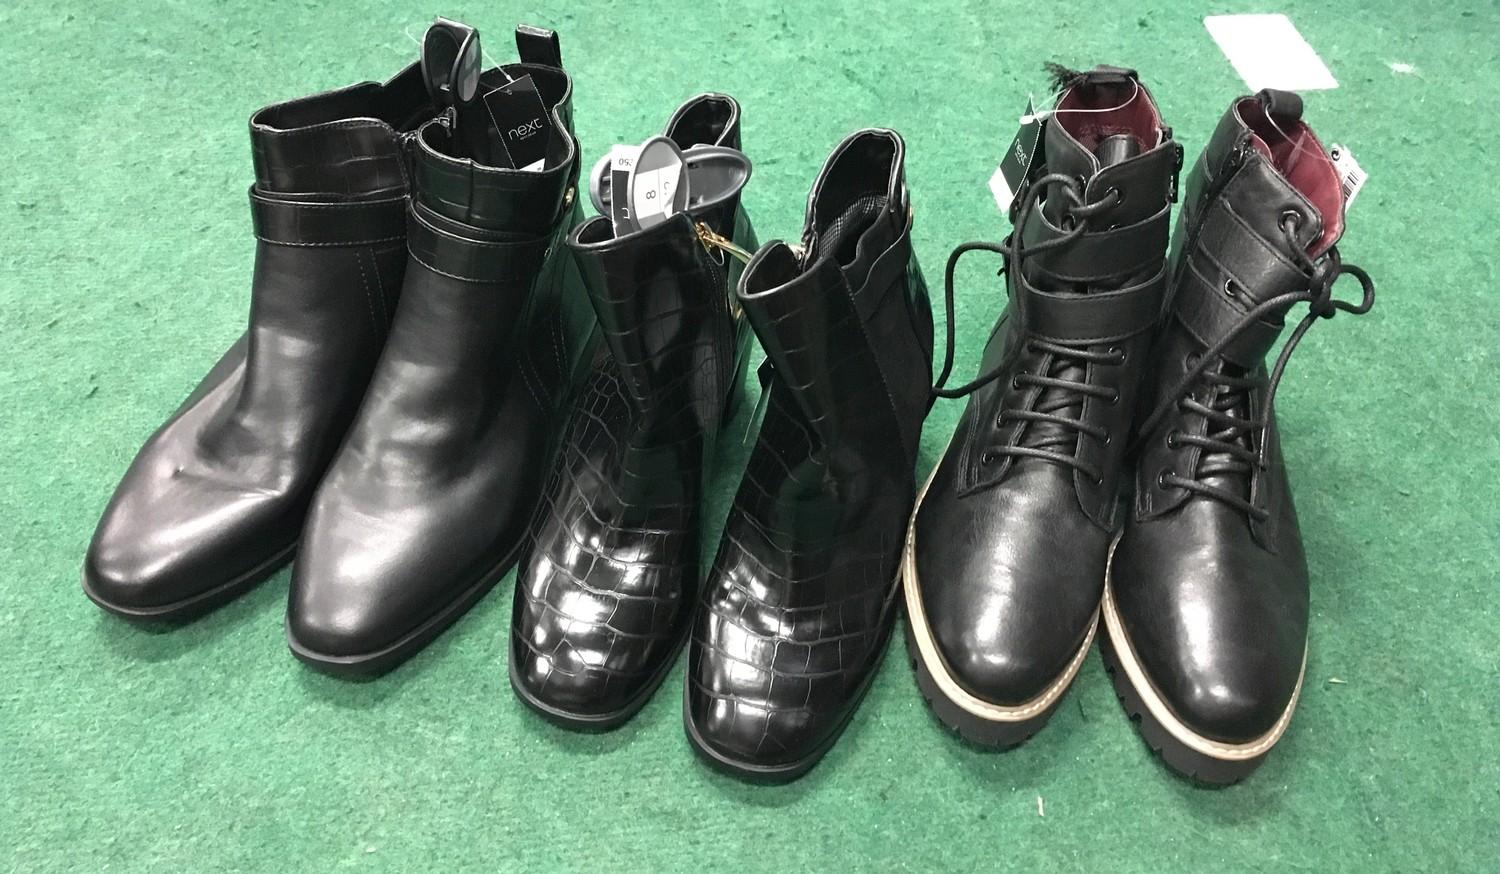 Three pairs of Next boots sized 5 and 6 (REF 89).